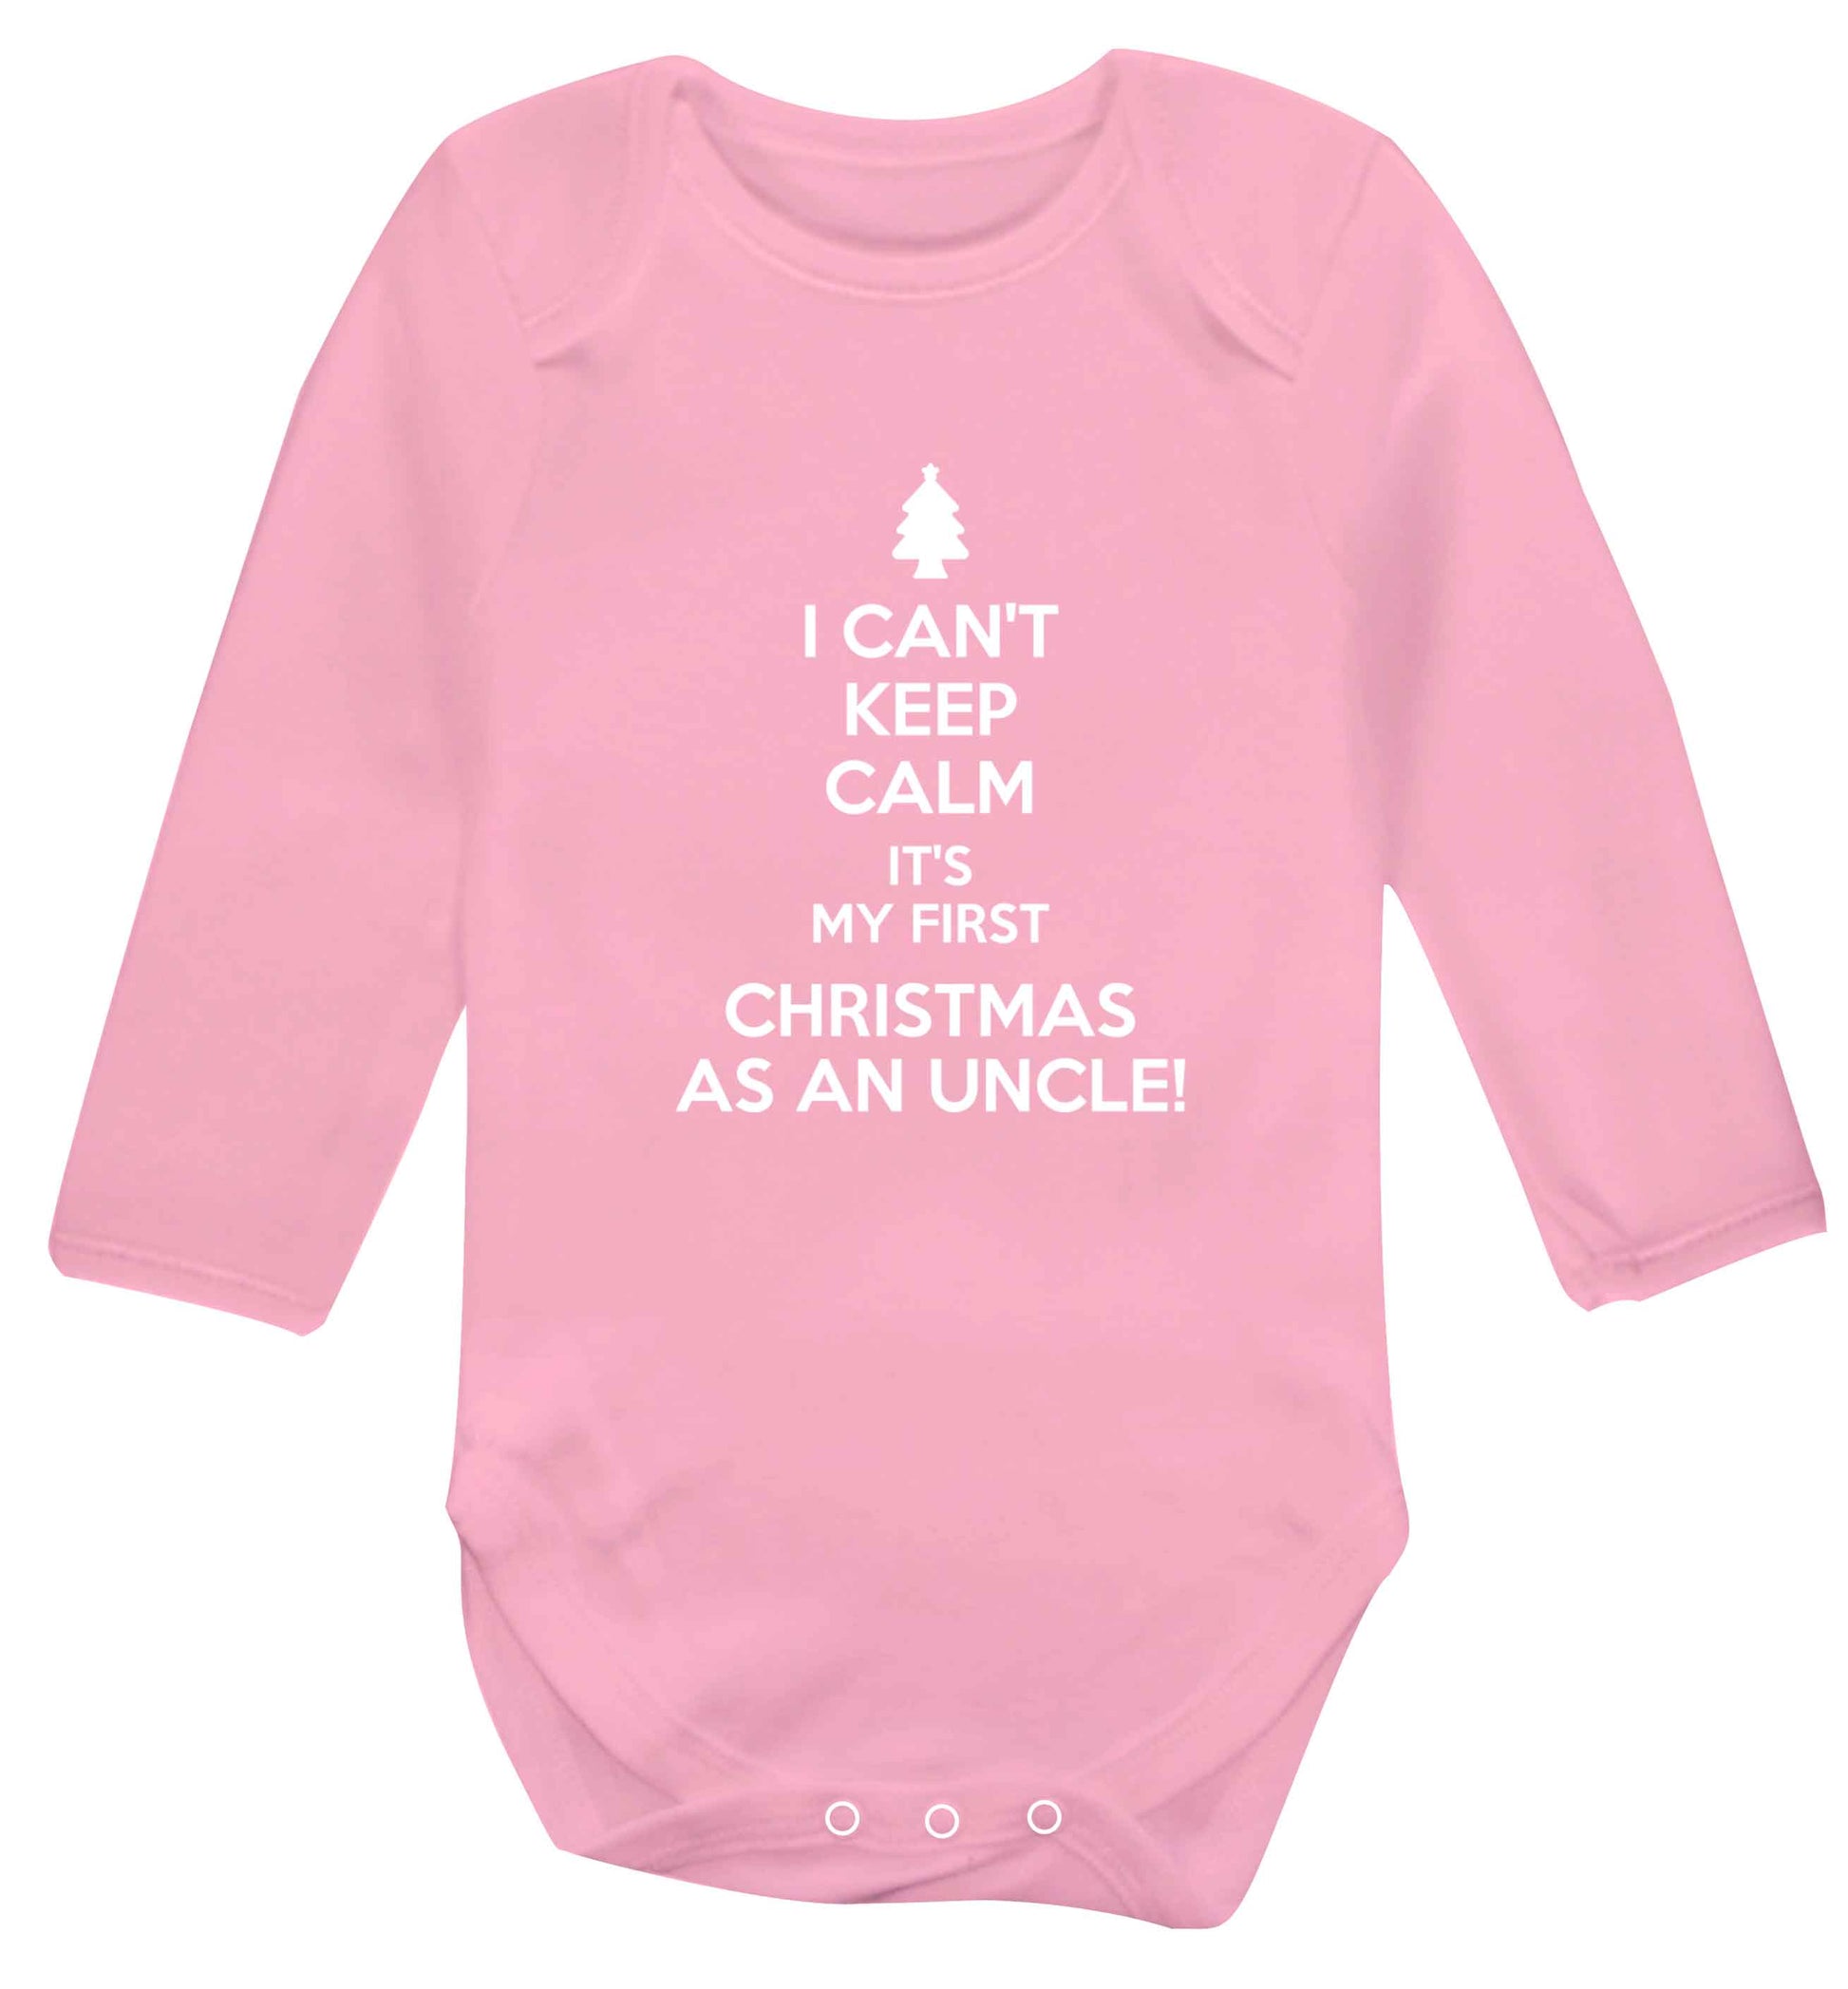 I can't keep calm it's my first Christmas as an uncle! Baby Vest long sleeved pale pink 6-12 months